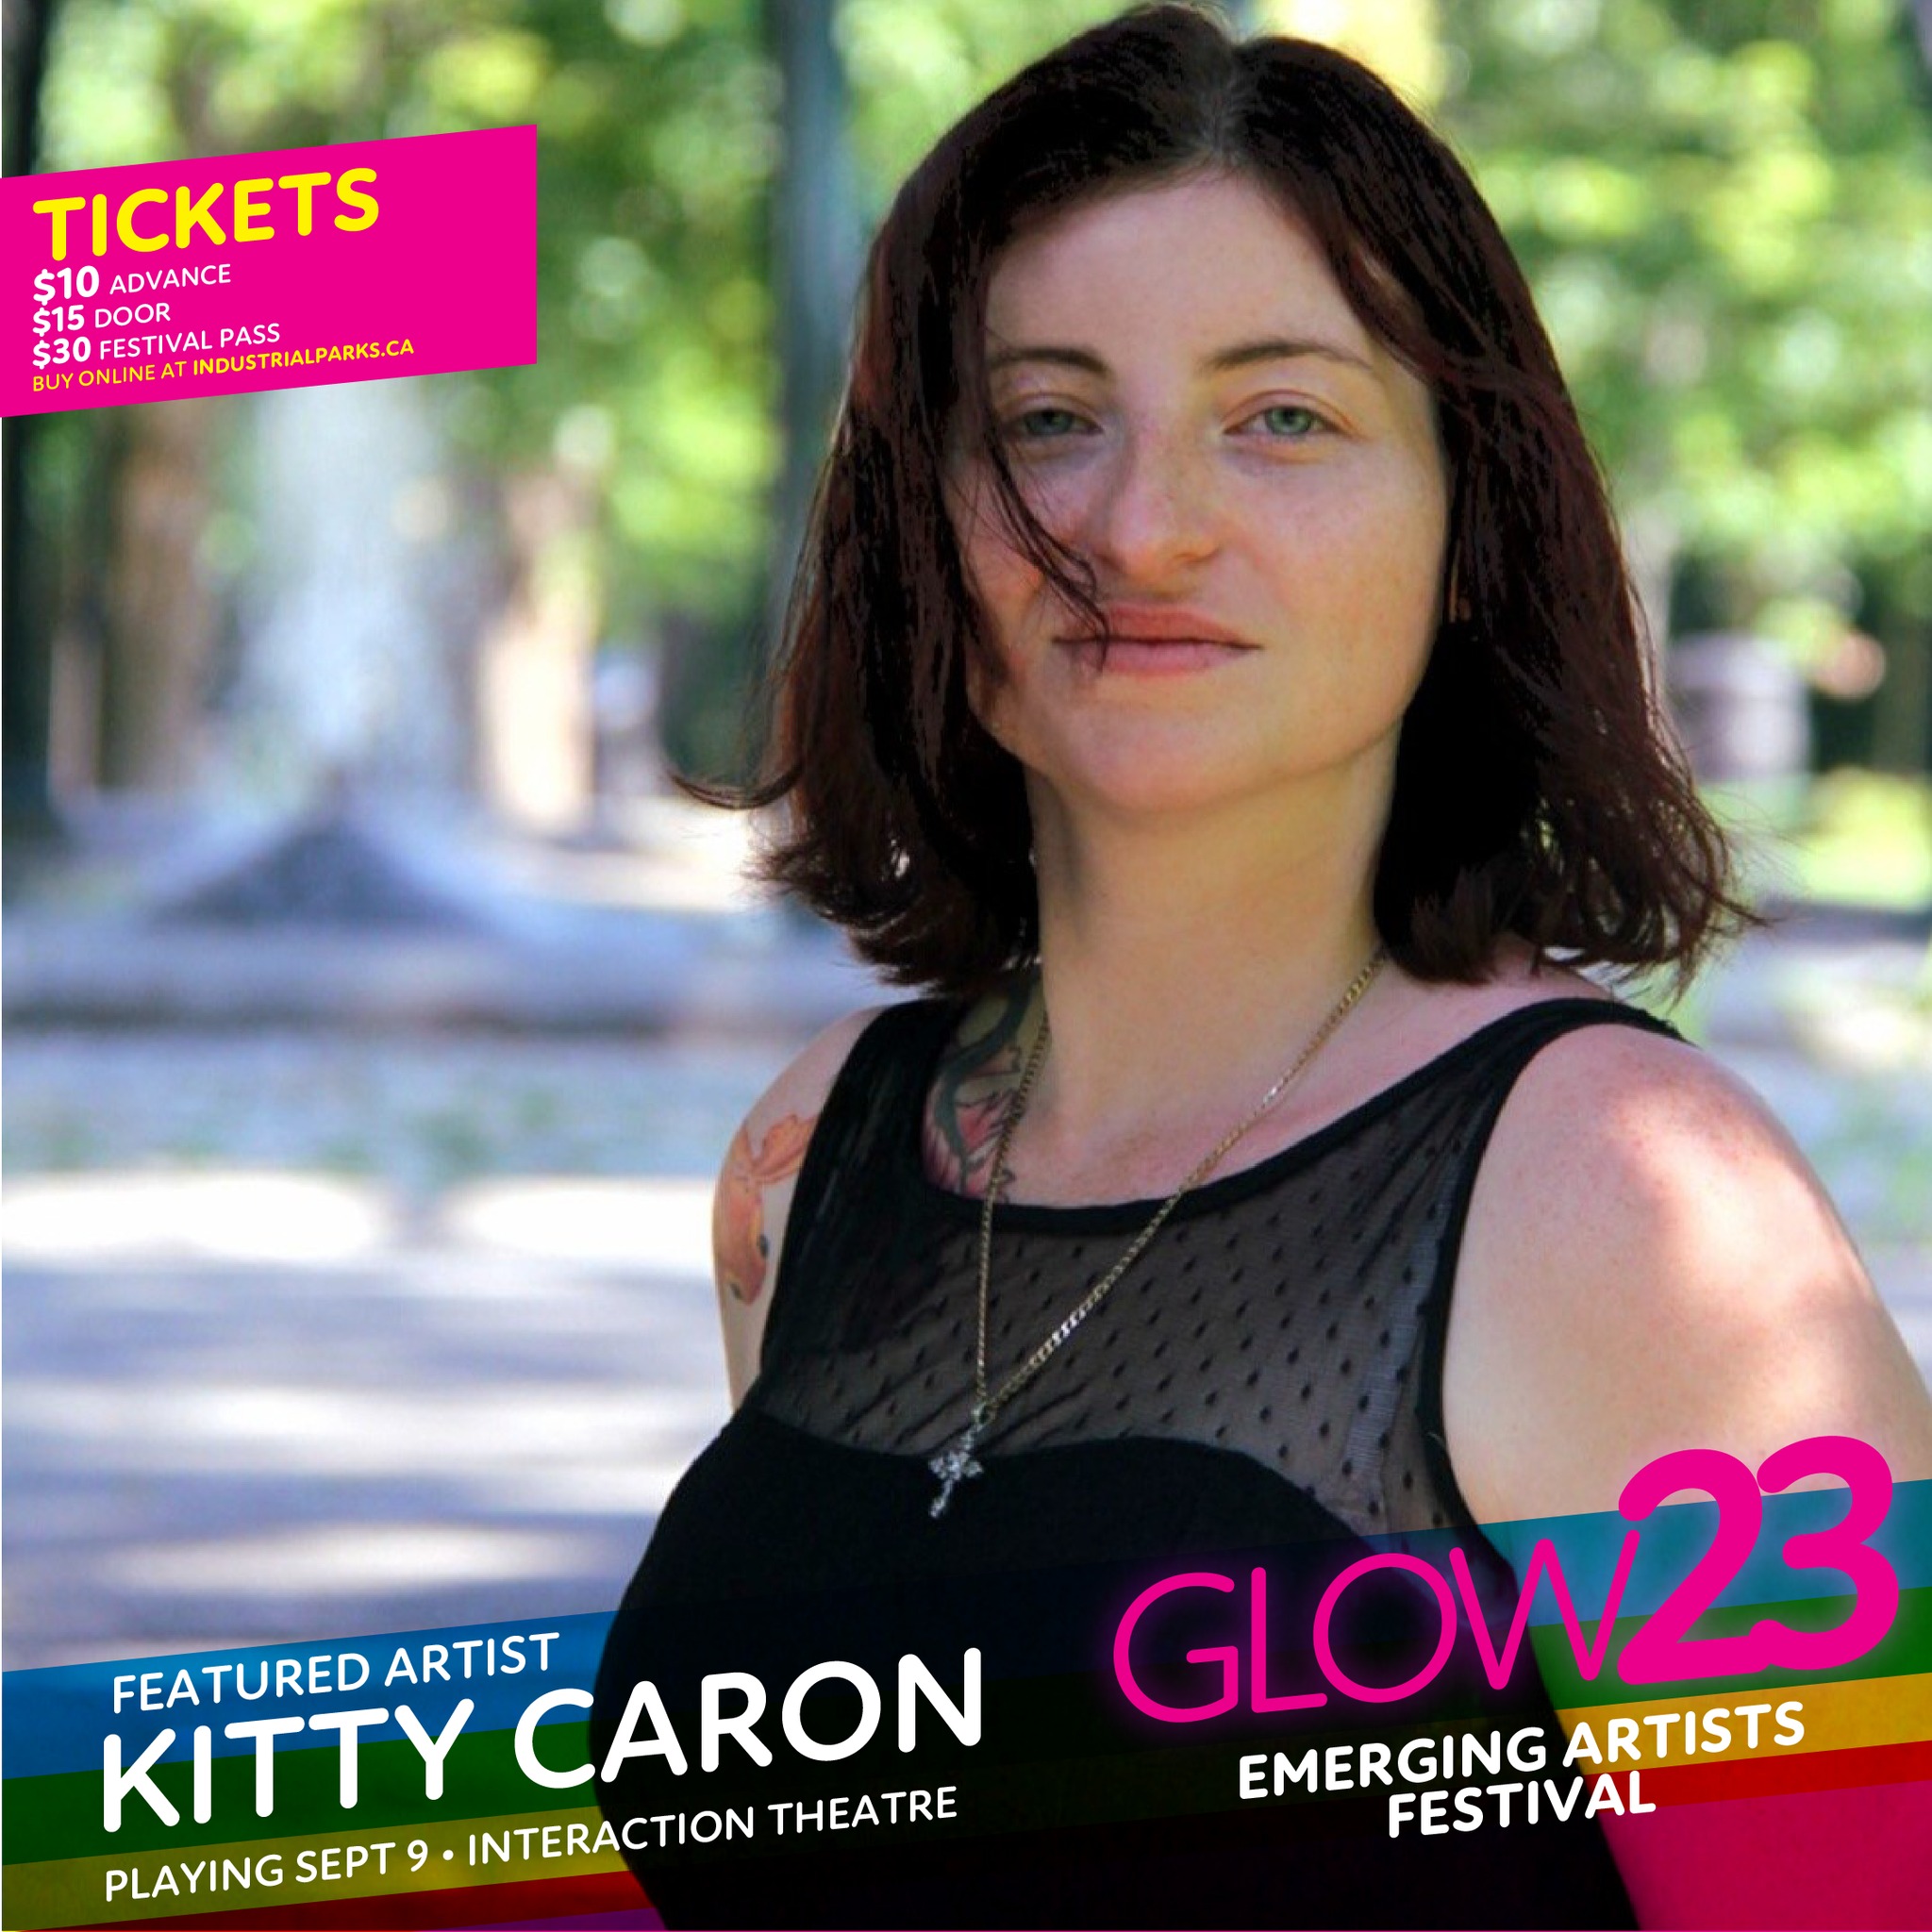 TONIGHT at GLOW Festival 
7:30 PM at Interaction Theatre

My name is Kitty. I'm very passionate about art and music. I've dealt with a lot of change and difficulty in my life, but art and music have always felt like home. I strive to bring that same comfort and joy to the people around me. You may know me as the girl singing at the market, but get ready to see me more on stage as well. 

@interaction_performingarts 
#GLOW23 

TICKETS (Buy online at industrialparks.ca)
$10 Advance
$15 Door
$30 Festival Pass